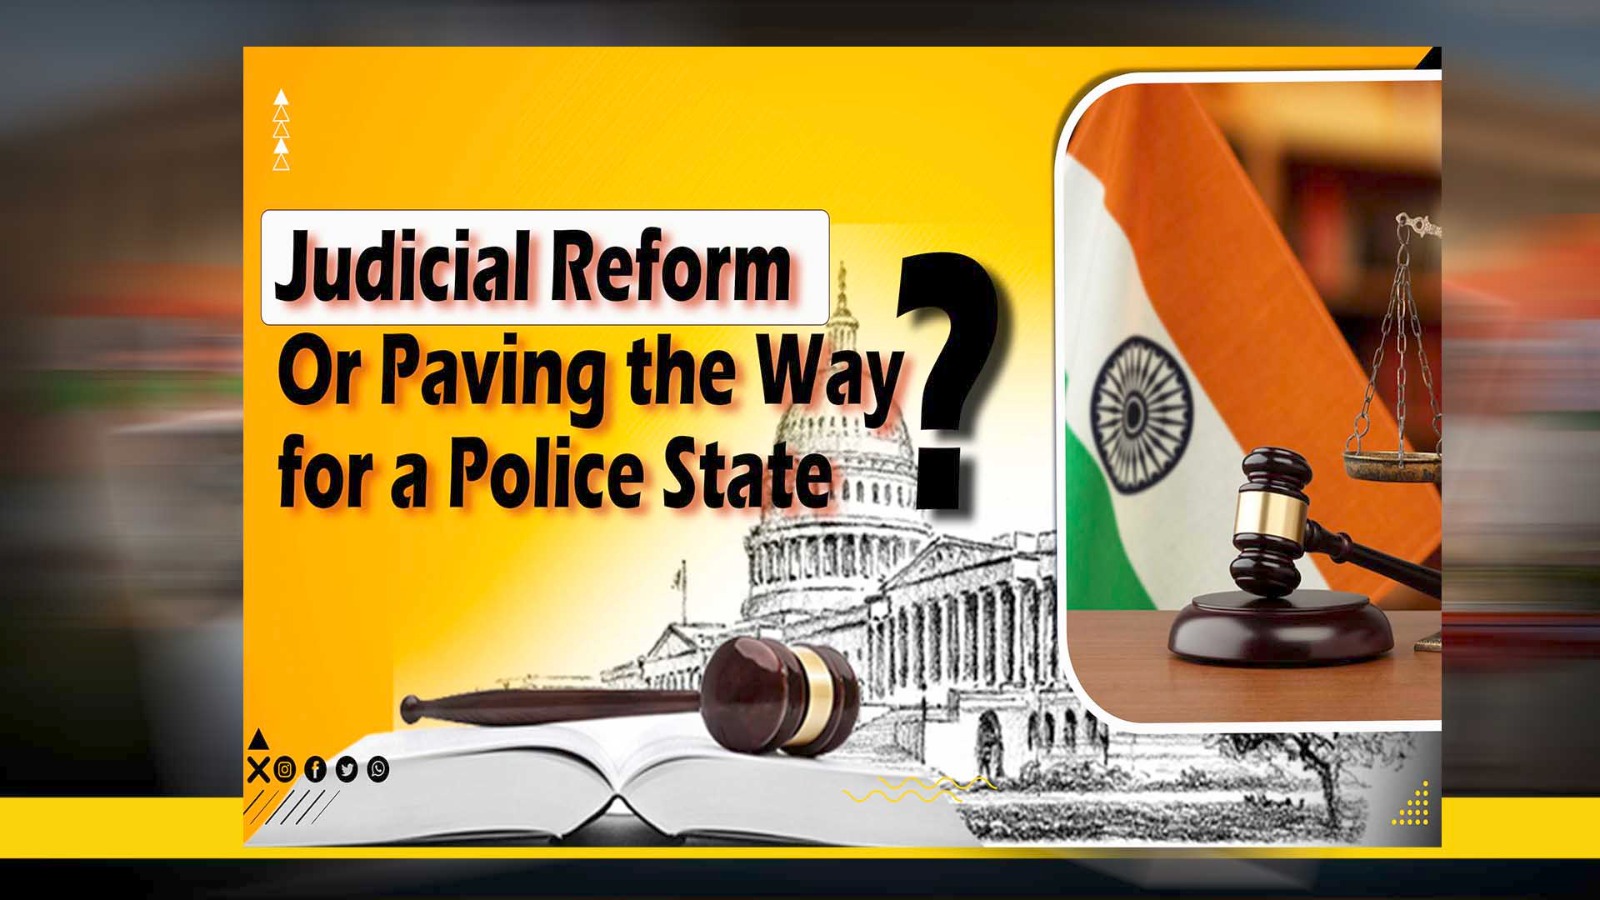 Judicial Reform Or Paving the Way for a Police State?